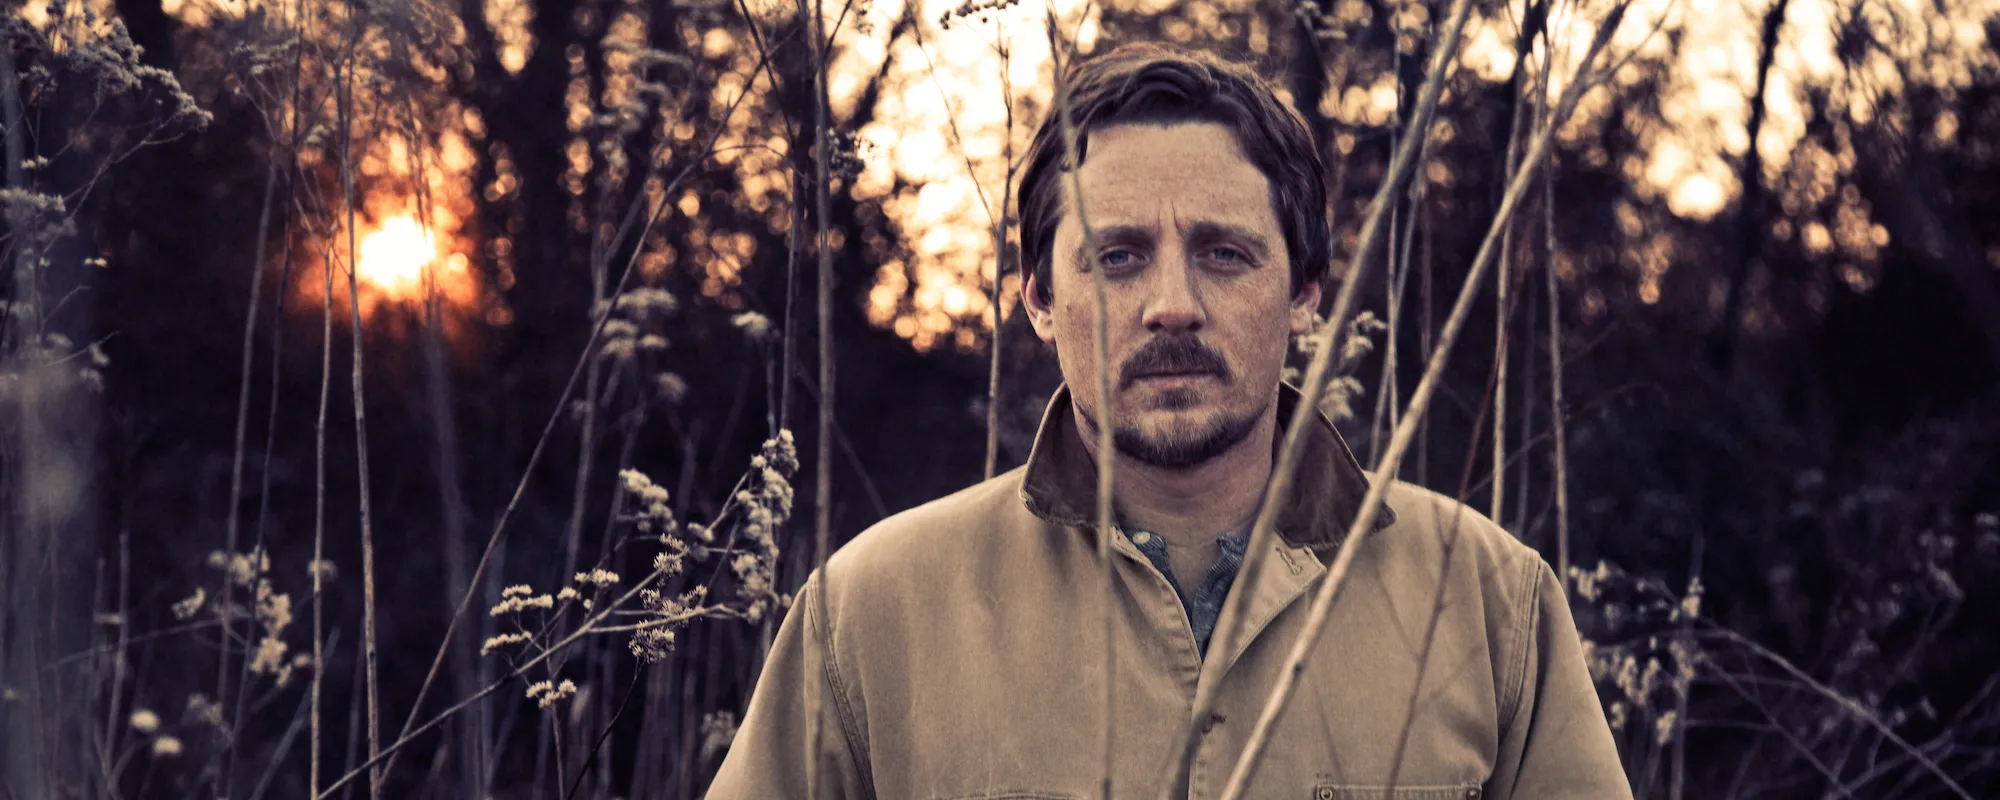 5 Albums You Didn’t Know Sturgill Simpson Produced